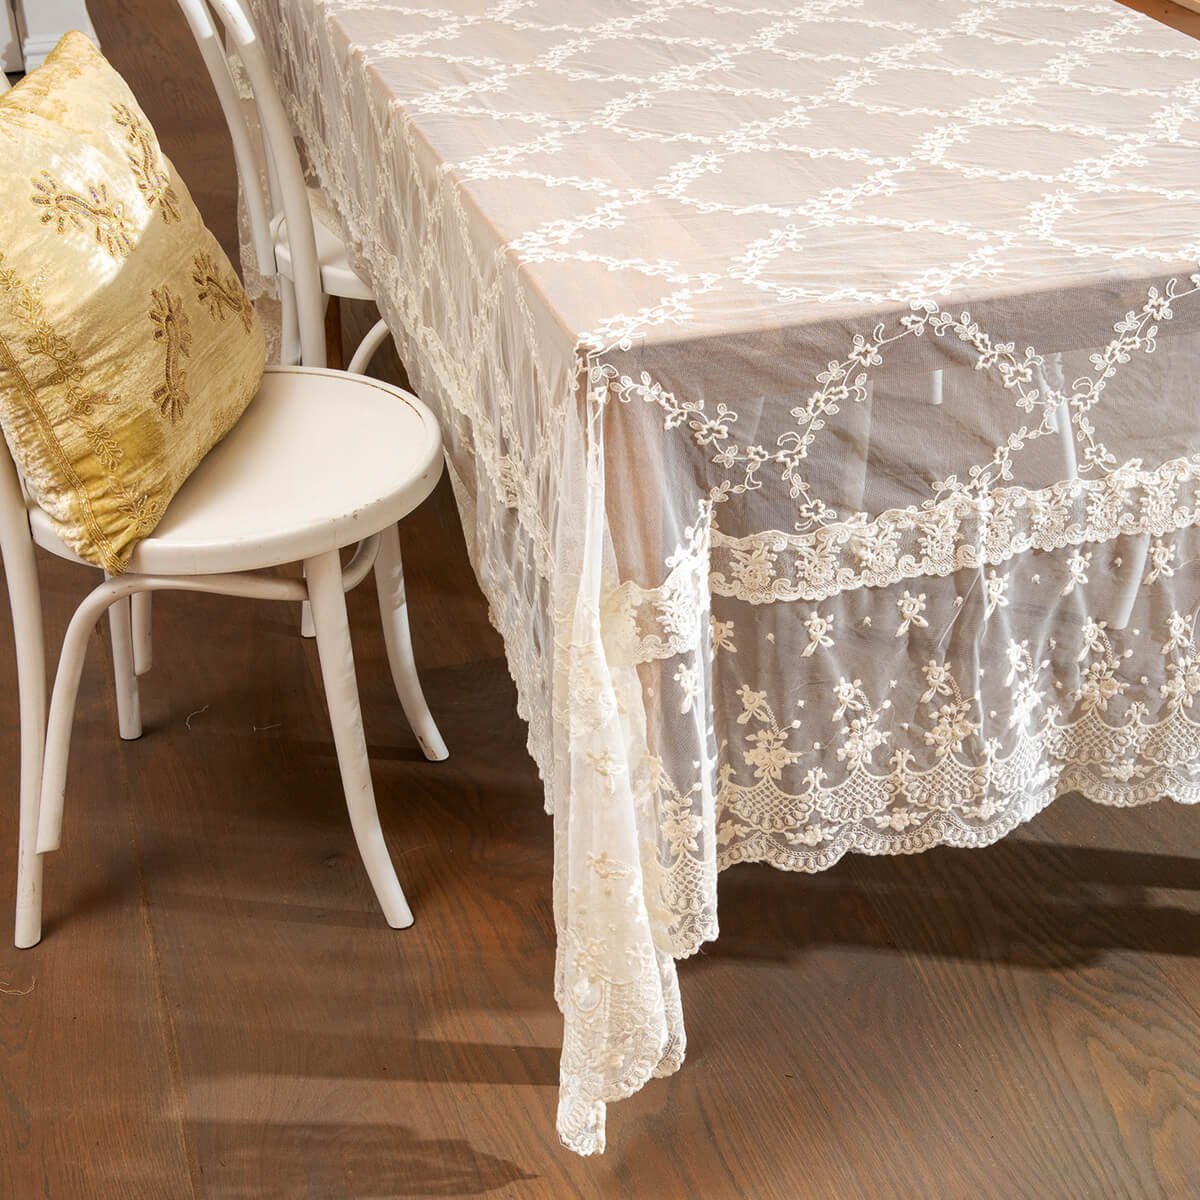 Vintage Lace Scalloped Trim Tablecloth - Ivory